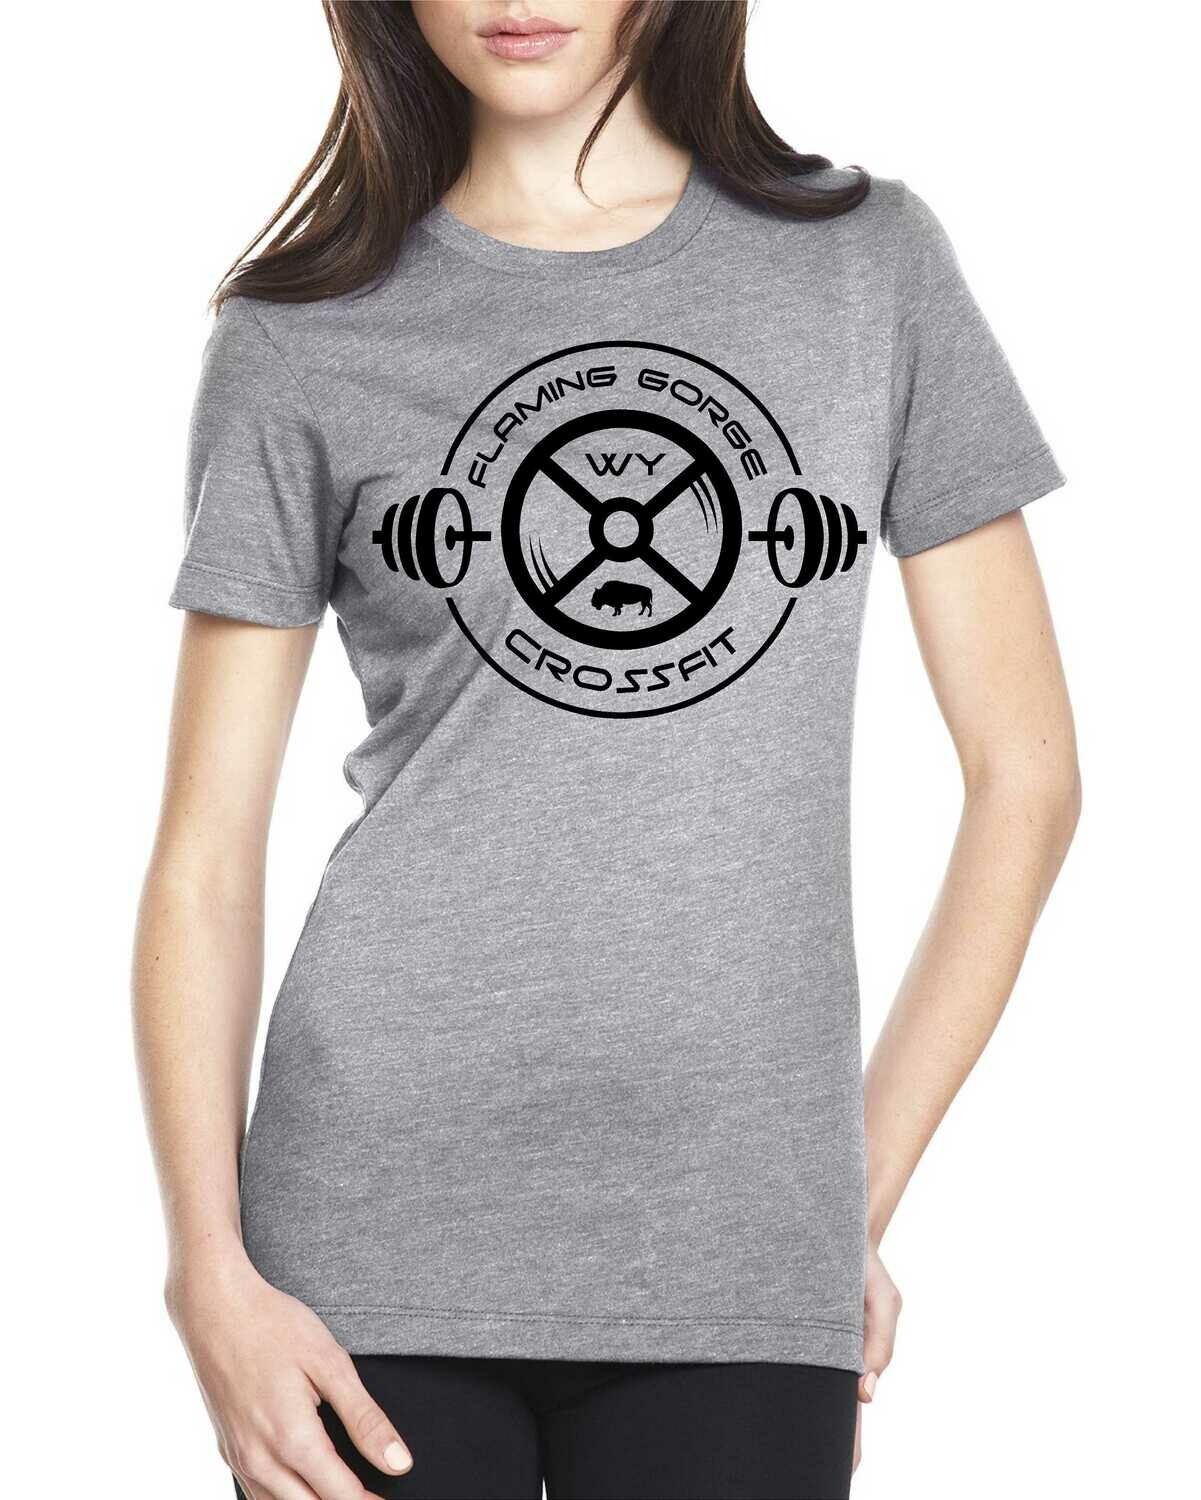 Flaming Gorge Crossfit Women's Gray Tee with Black Design